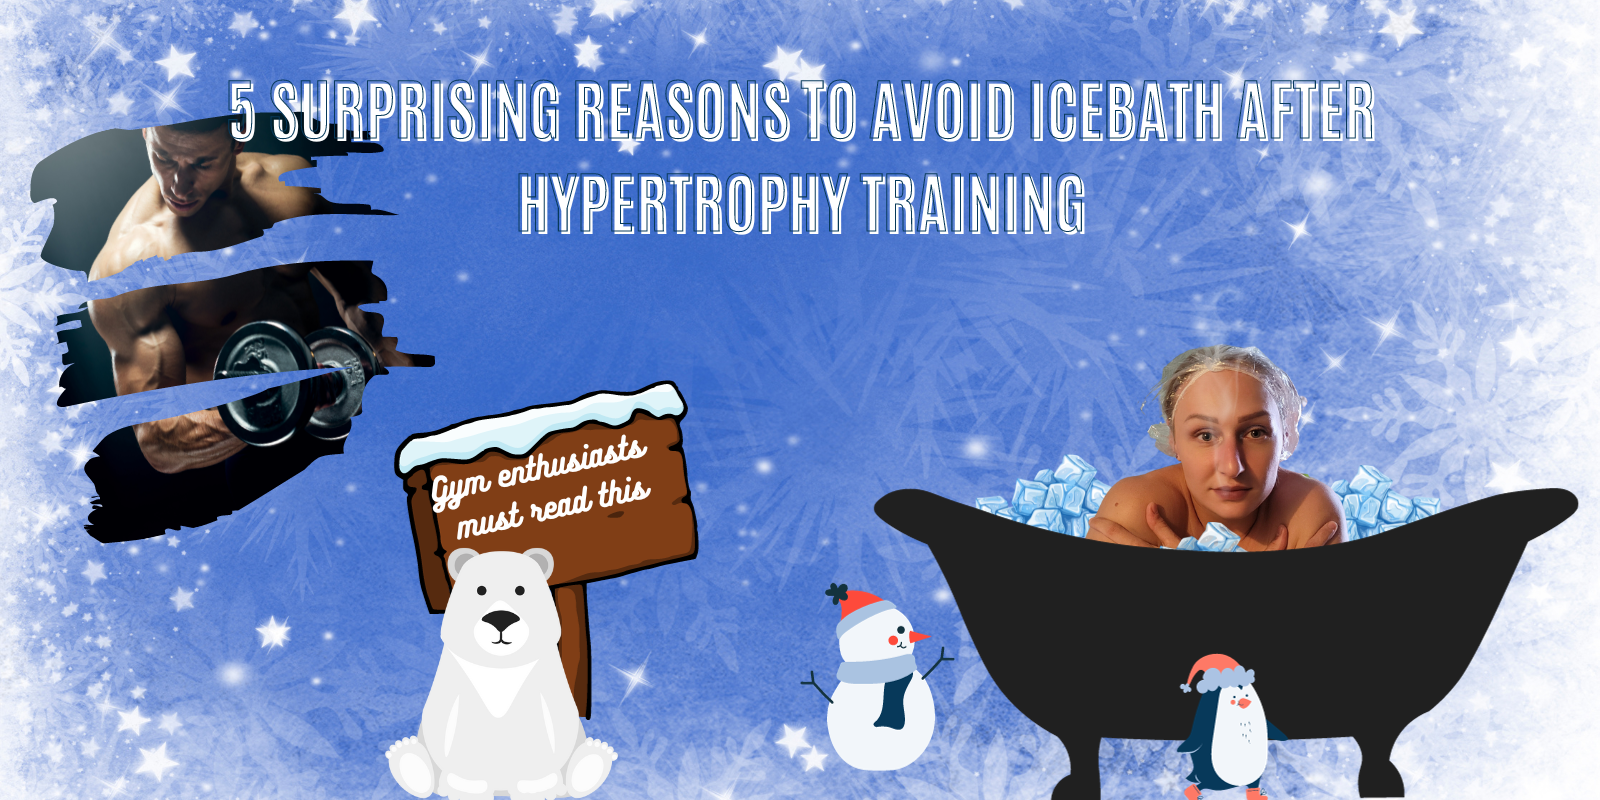 Cold Water Immersion and Hypertrophy - Outwork Nutrition